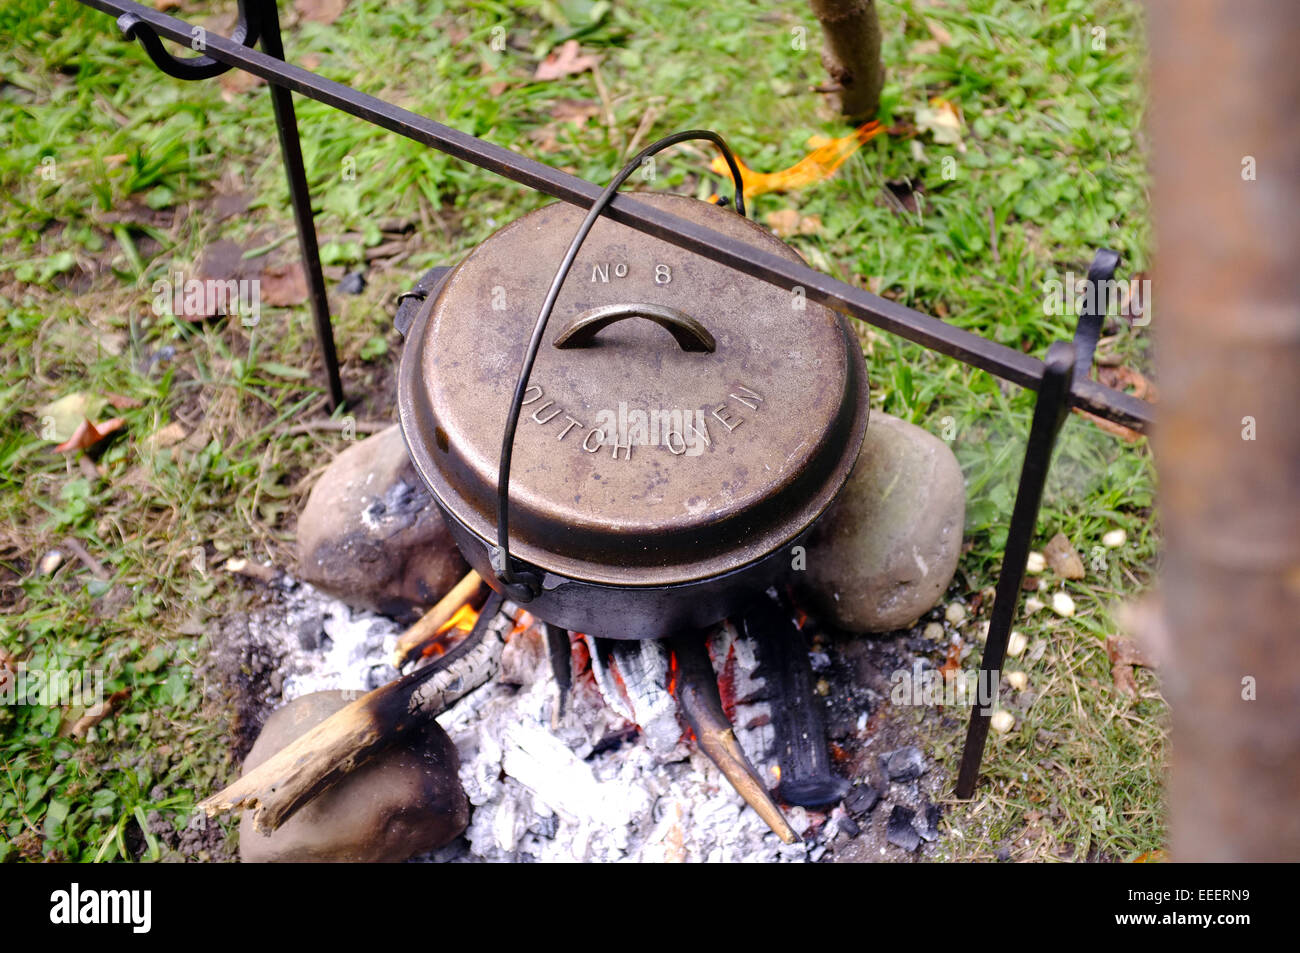 https://c8.alamy.com/comp/EEERN9/a-dutch-oven-cooking-over-an-open-fire-at-the-museum-of-ontario-archaeology-EEERN9.jpg